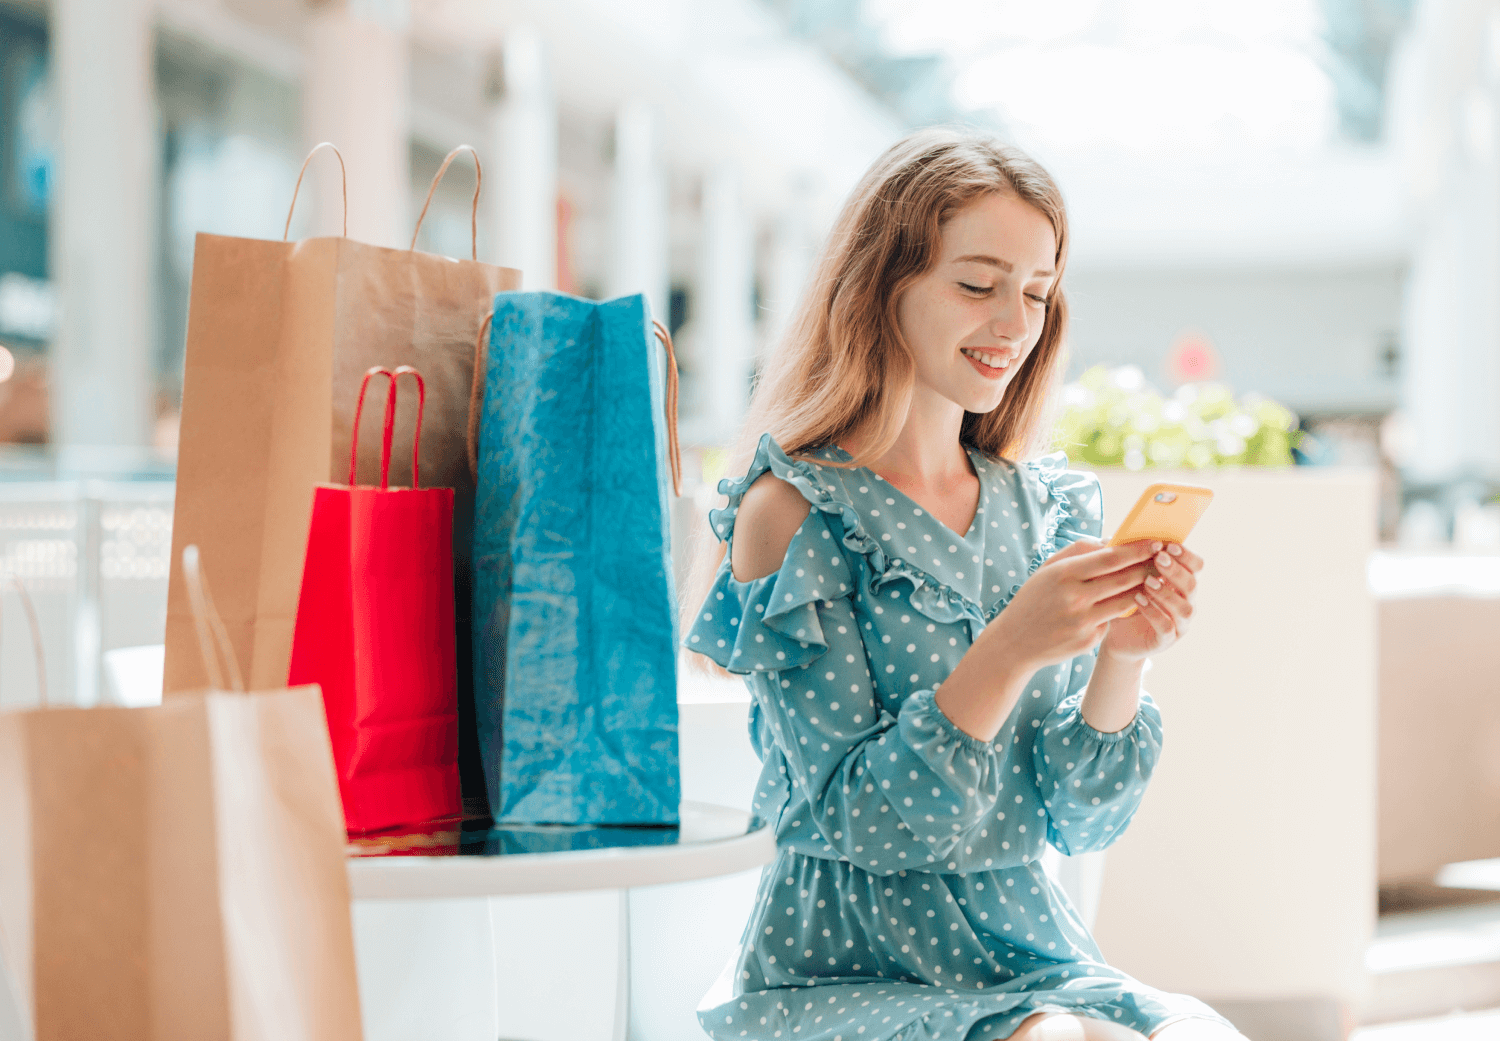 Adobe published the list of eCommerce trends for 2023